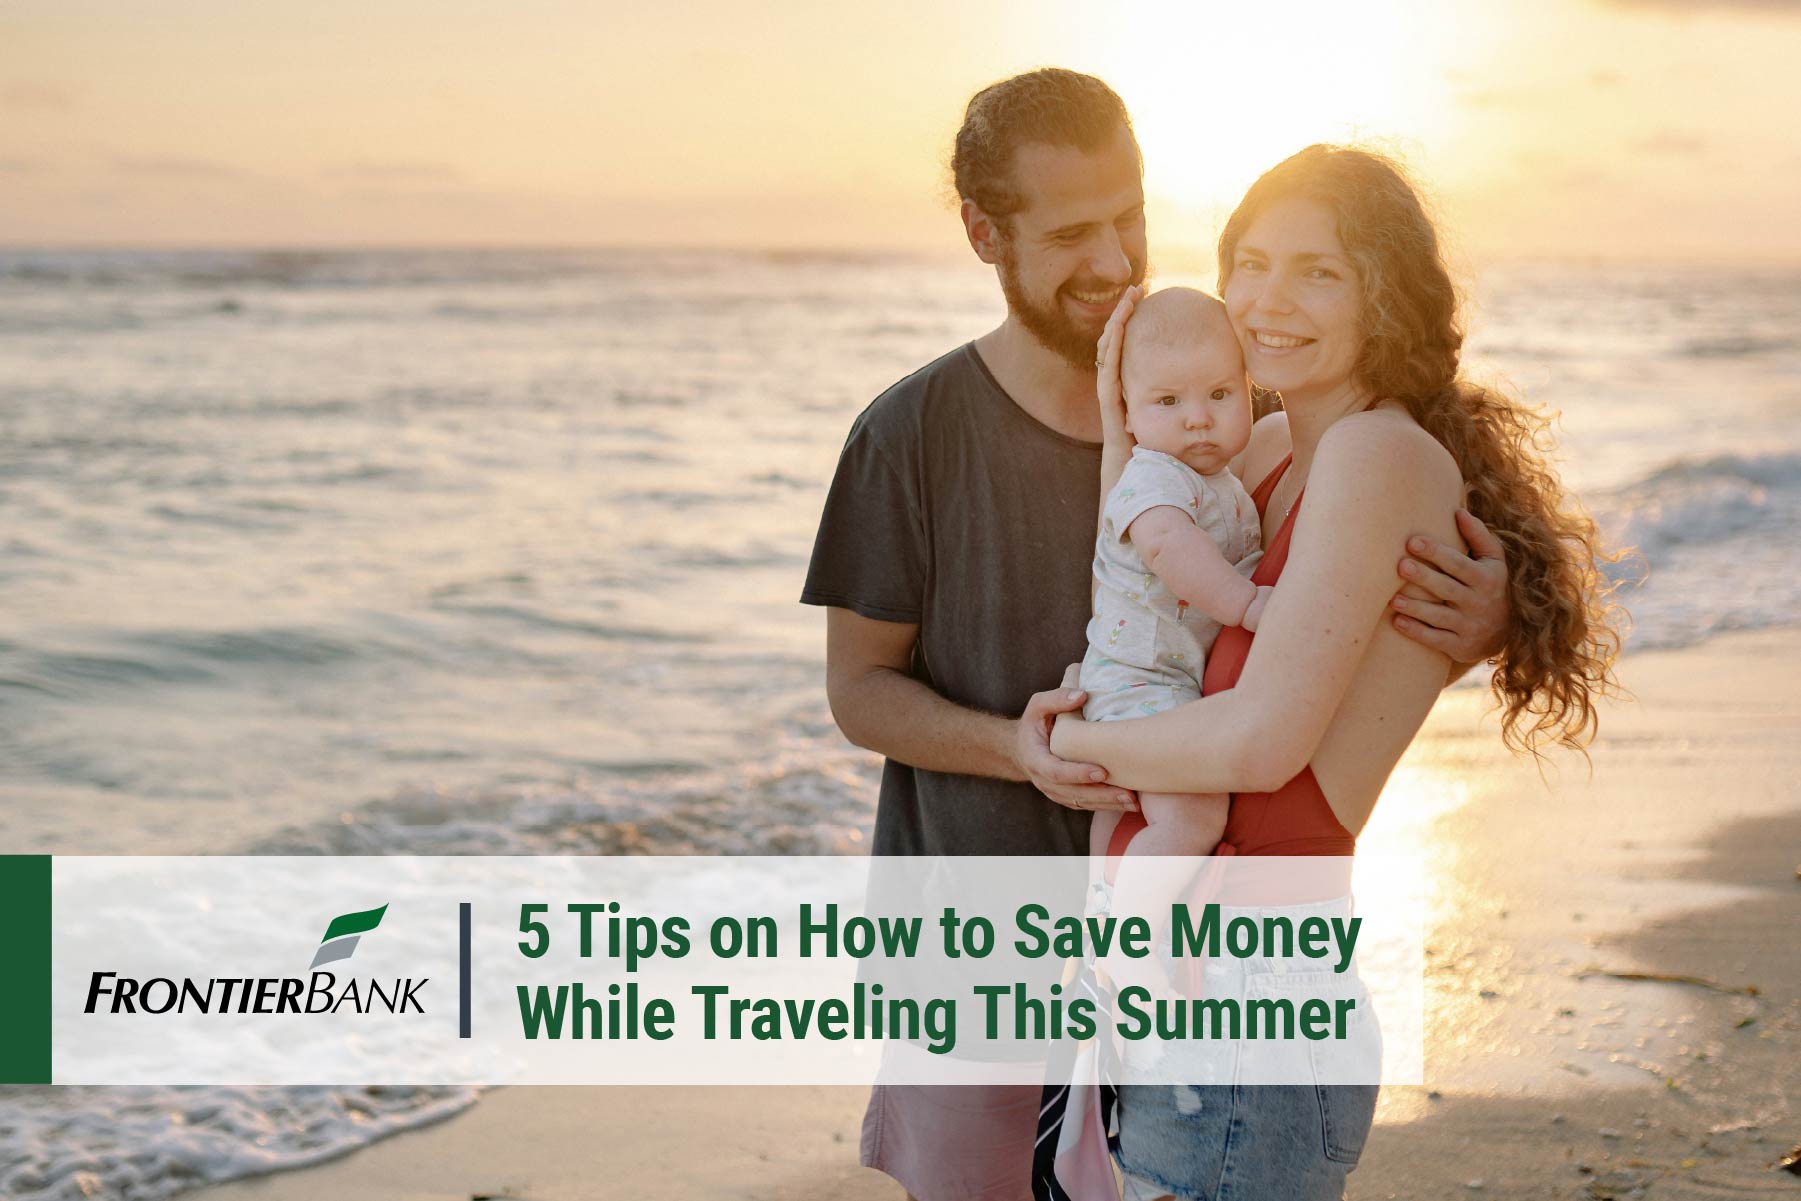 5 Tips on How to Save Money While Traveling This Summer with graphic